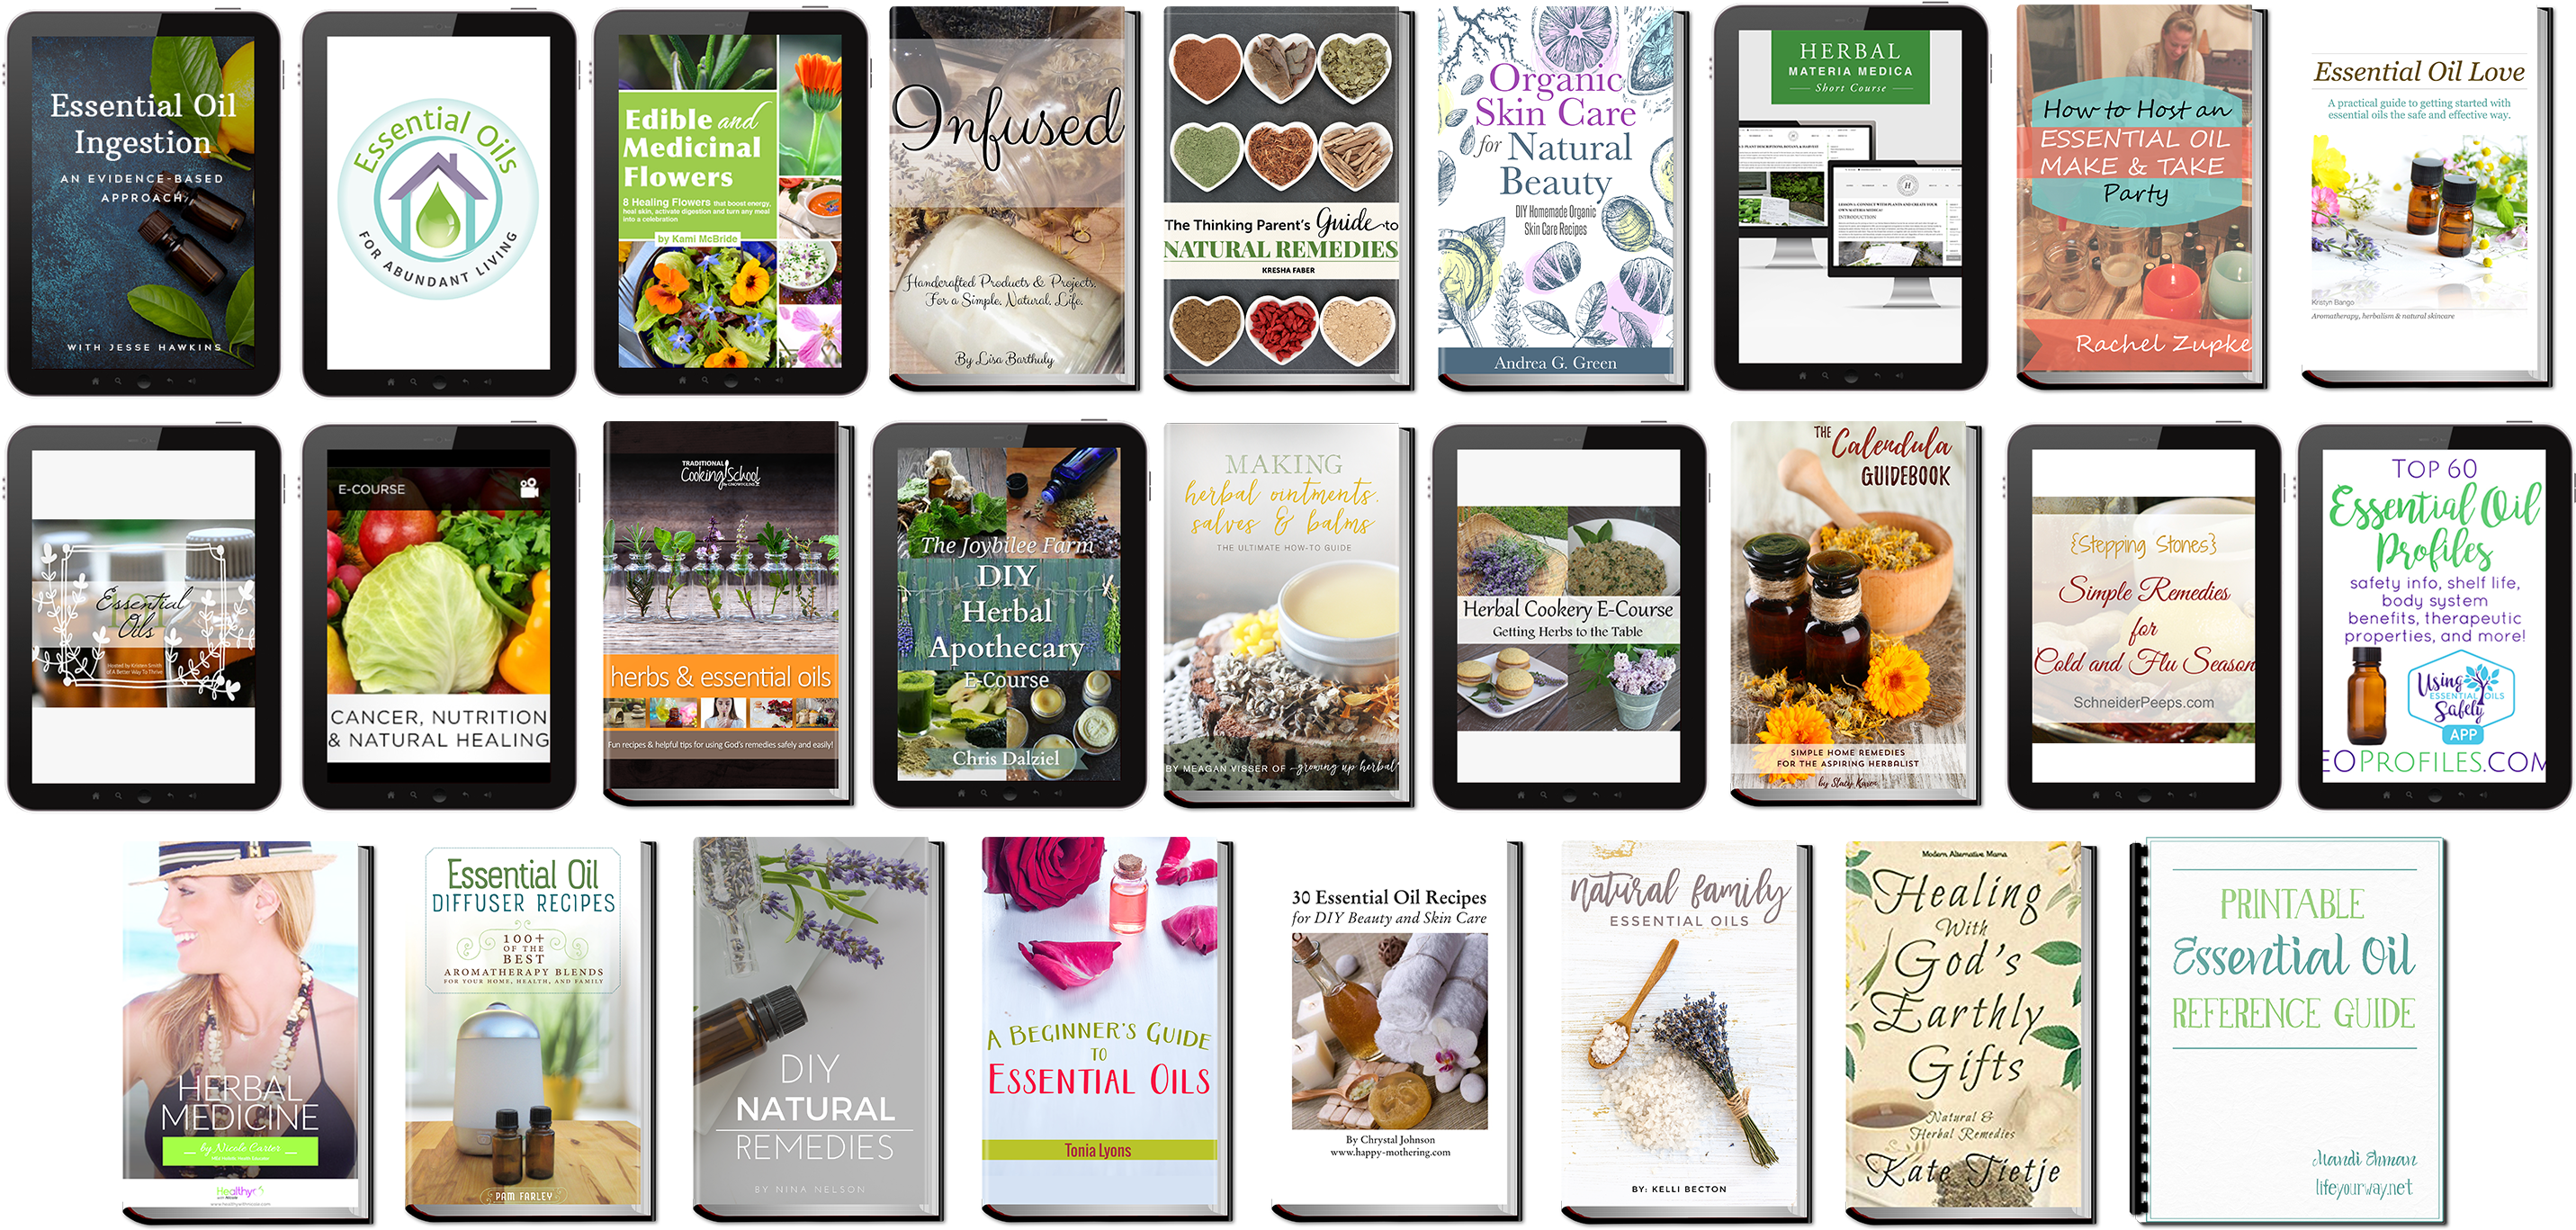 An Herb And Essential Oil Resource You Won’t Want To Miss Out On! | Herbal Academy | Here's an herb and essential oil resource you won't want to miss. Limited time only!